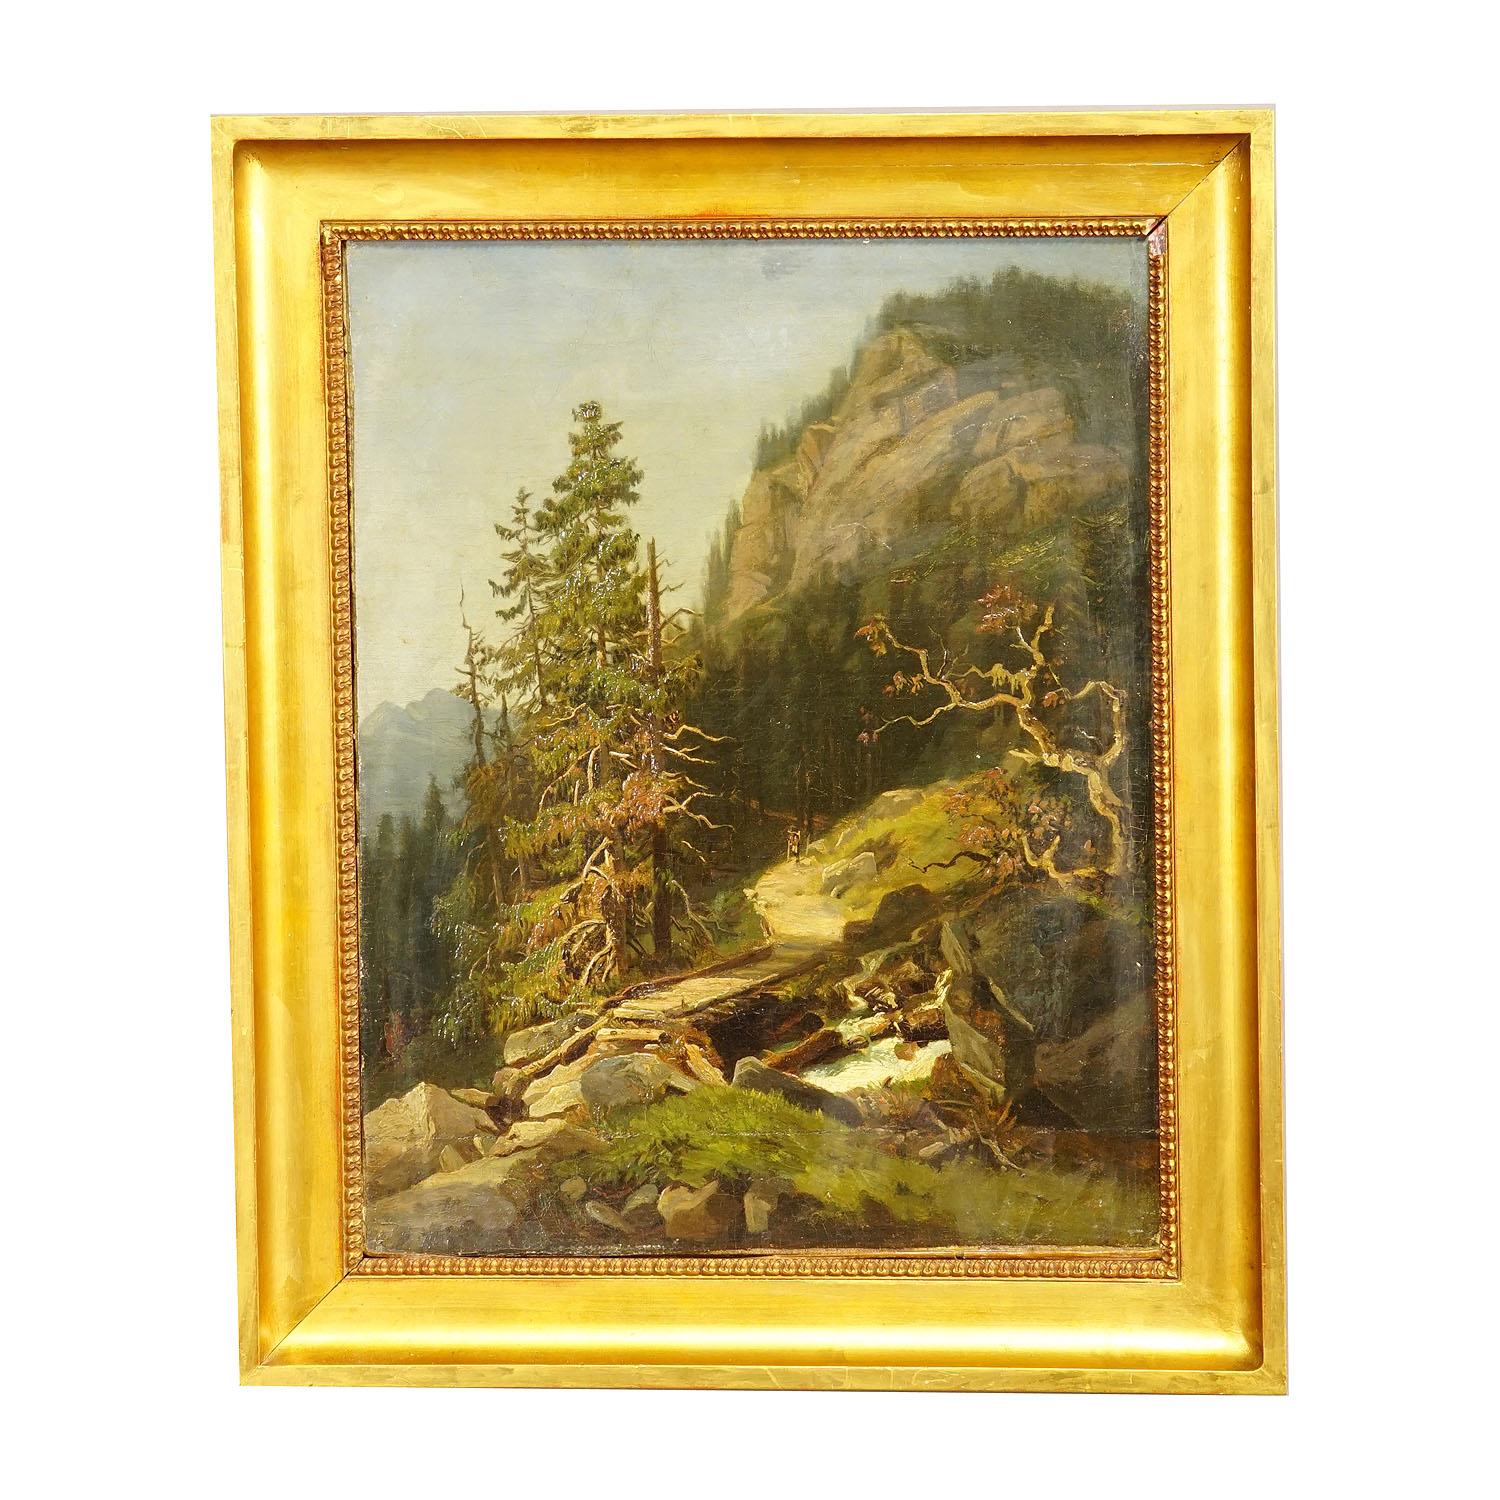 Summerly Mountain Landscape with Hiker on Hiking Trail, 19th century.

An antique oil painting depicting a hiker on an alpine hiking trail and a bridge over a mountrain stream. Painted on canvas with pastell colors. Framed with antique decorative